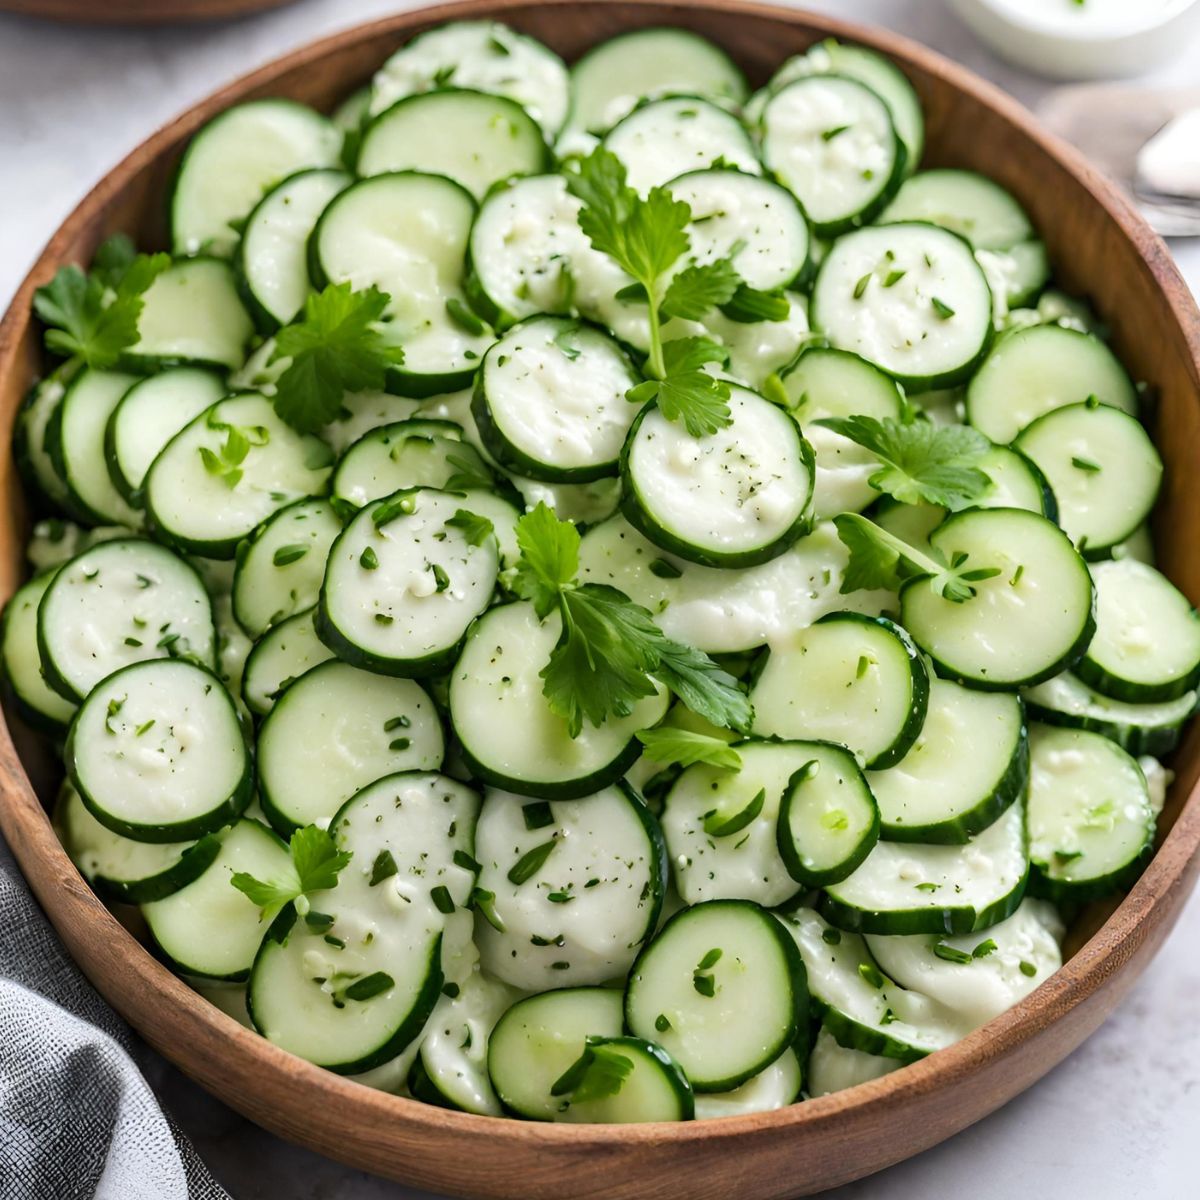 Creamy Cucumber Salad Recipe "Healthy and Refreshing"